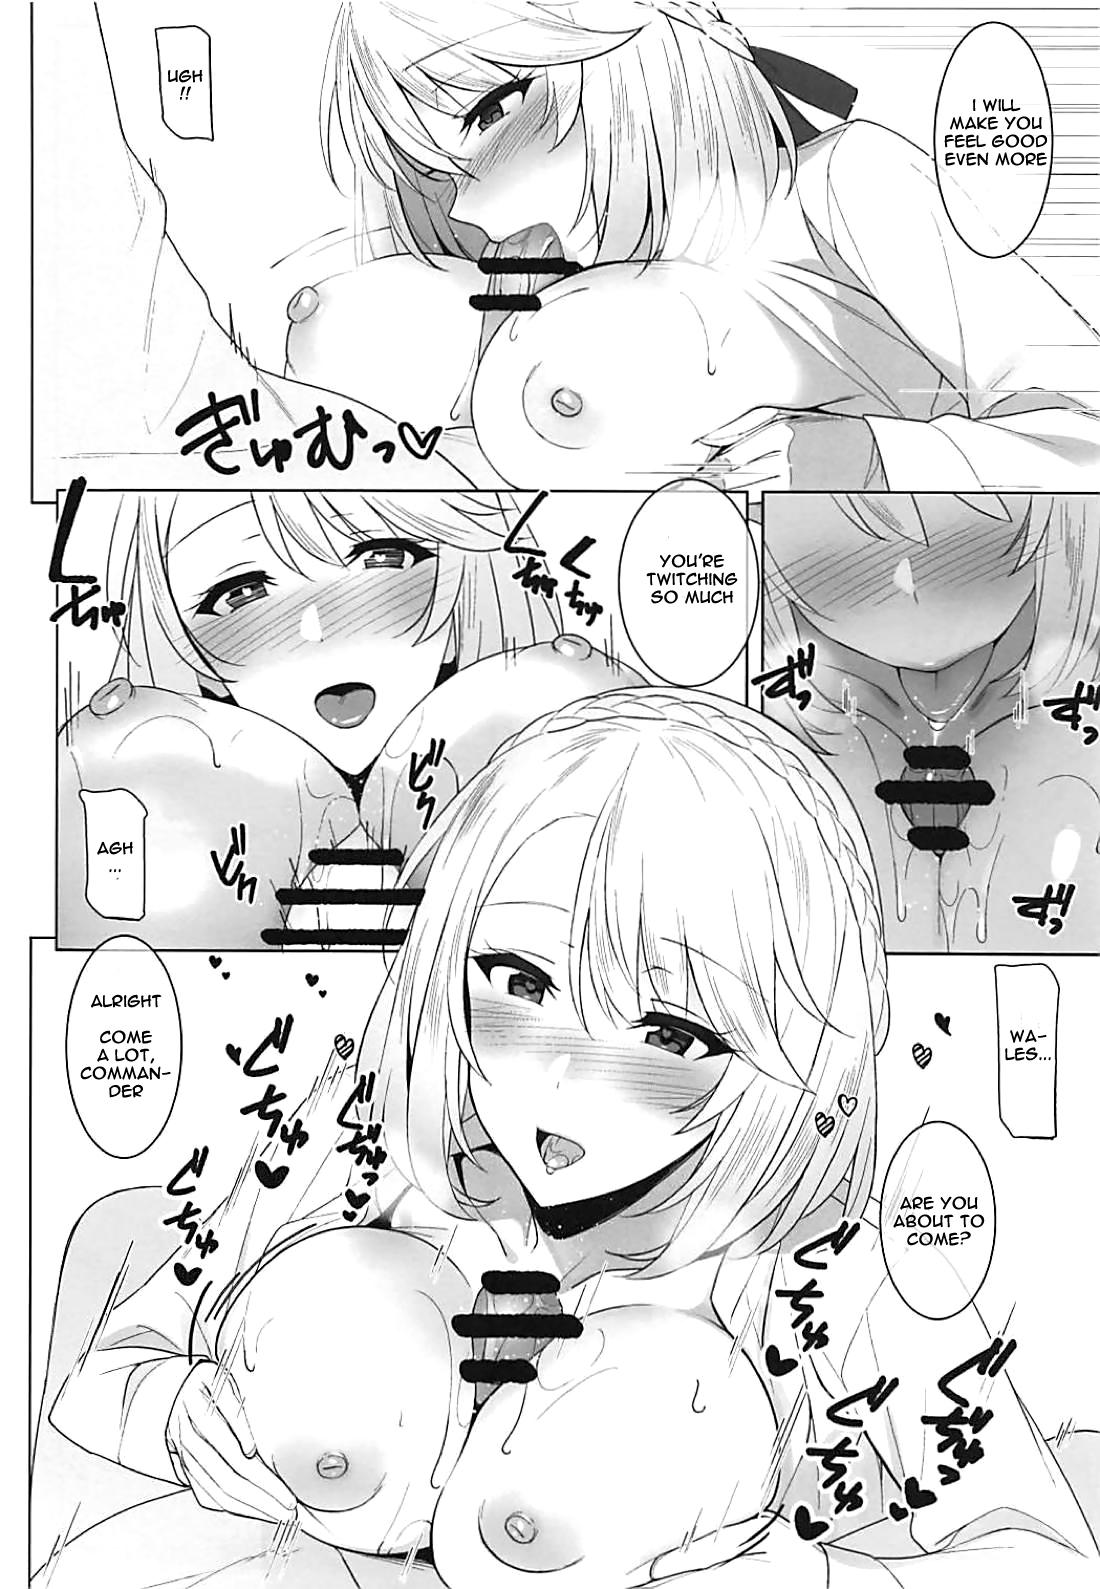 Stud Wales to! | With Wales! - Azur lane Boobies - Page 10